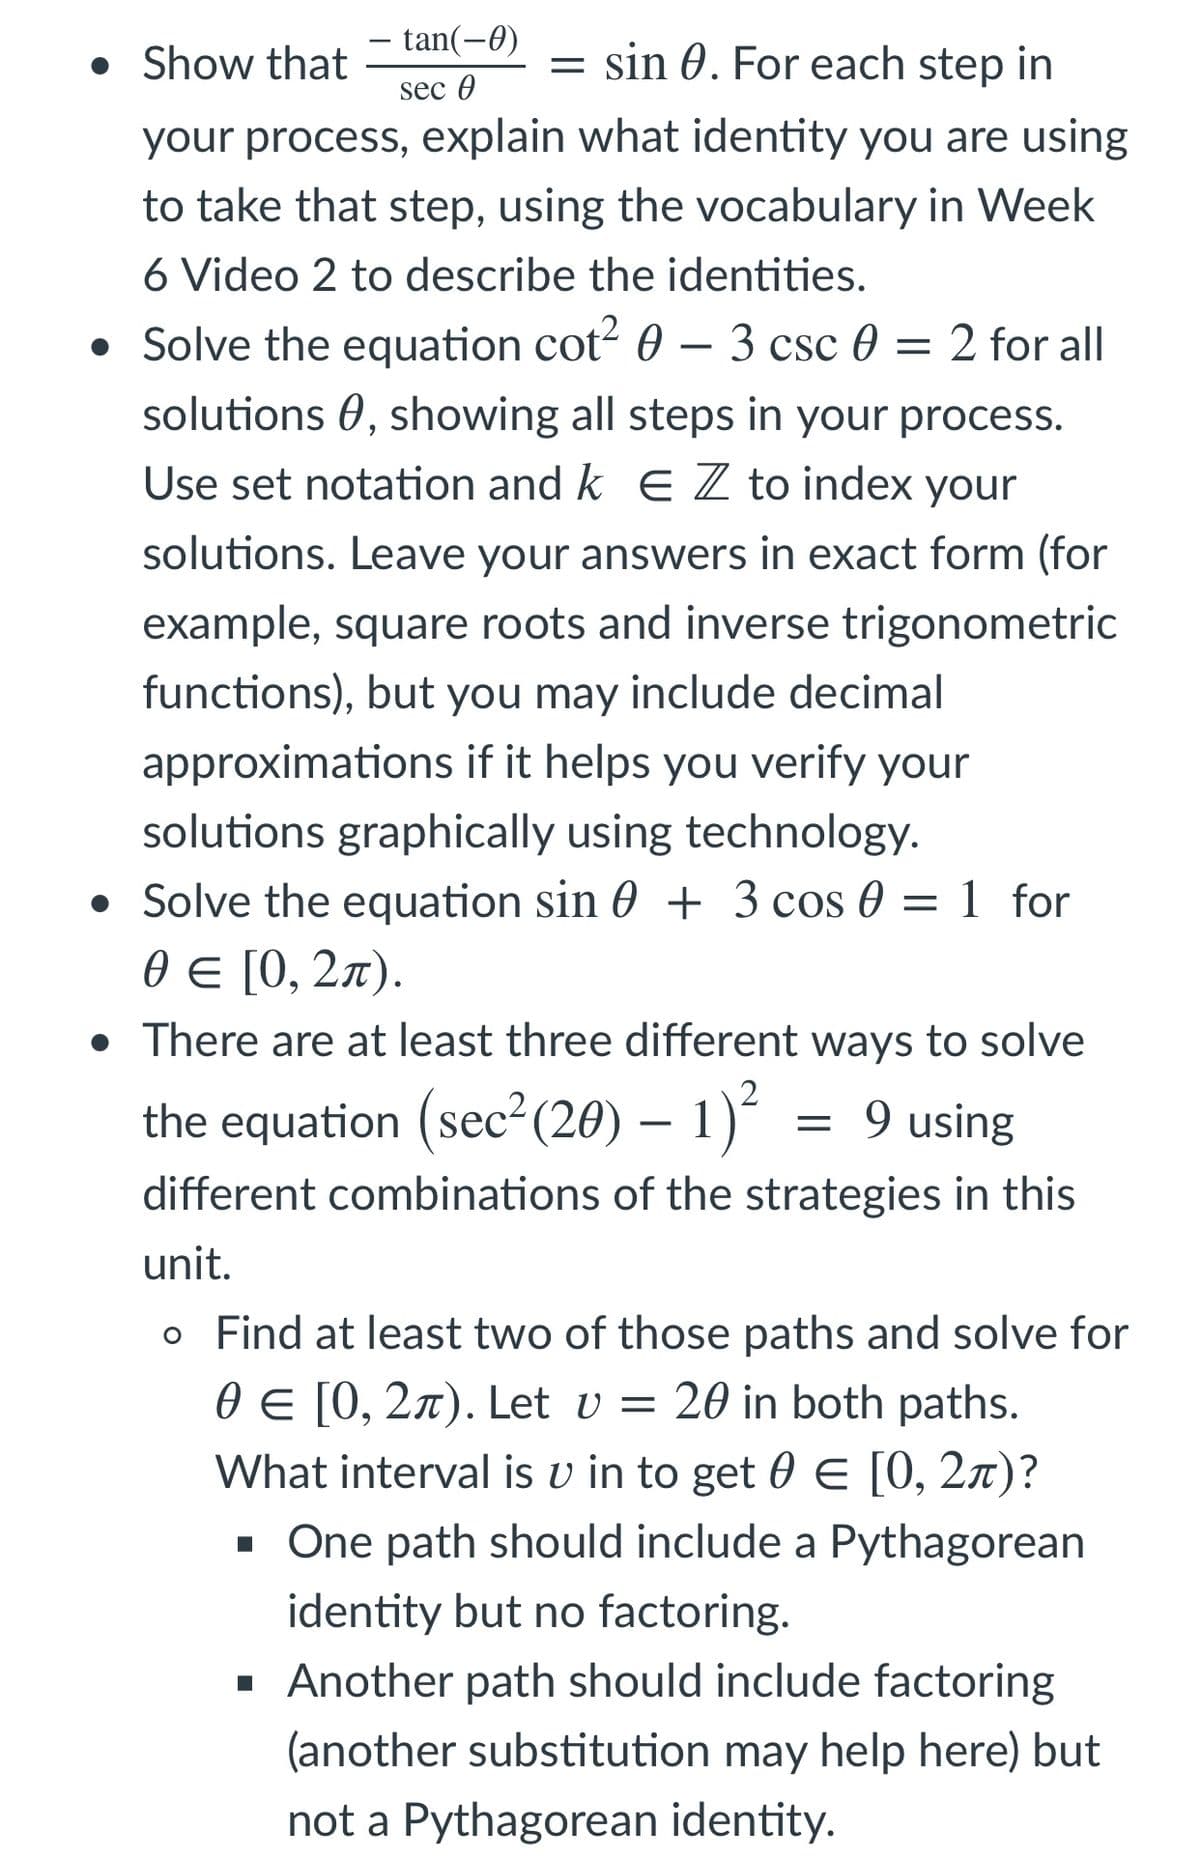 tan(-0)
• Show that
= sin 0. For each step in
sec 0
your process, explain what identity you are using
to take that step, using the vocabulary in Week
6 Video 2 to describe the identities.
• Solve the equation cot? 0 – 3 csc 0 = 2 for all
solutions 0, showing all steps in your process.
Use set notation and k E Z to index your
solutions. Leave your answers in exact form (for
example, square roots and inverse trigonometric
functions), but you may include decimal
approximations if it helps you verify your
solutions graphically using technology.
• Solve the equation sin 0 + 3 cos 0 = 1 for
0€ [0, 2л).
• There are at least three different ways to solve
2
the equation (sec (20) – 1)
9 using
different combinations of the strategies in this
unit.
o Find at least two of those paths and solve for
0 E [0, 2x). Let v = 20 in both paths.
What interval is v in to get 0 E [0, 2x)?
- One path should include a Pythagorean
identity but no factoring.
· Another path should include factoring
(another substitution may help here) but
not a Pythagorean identity.
